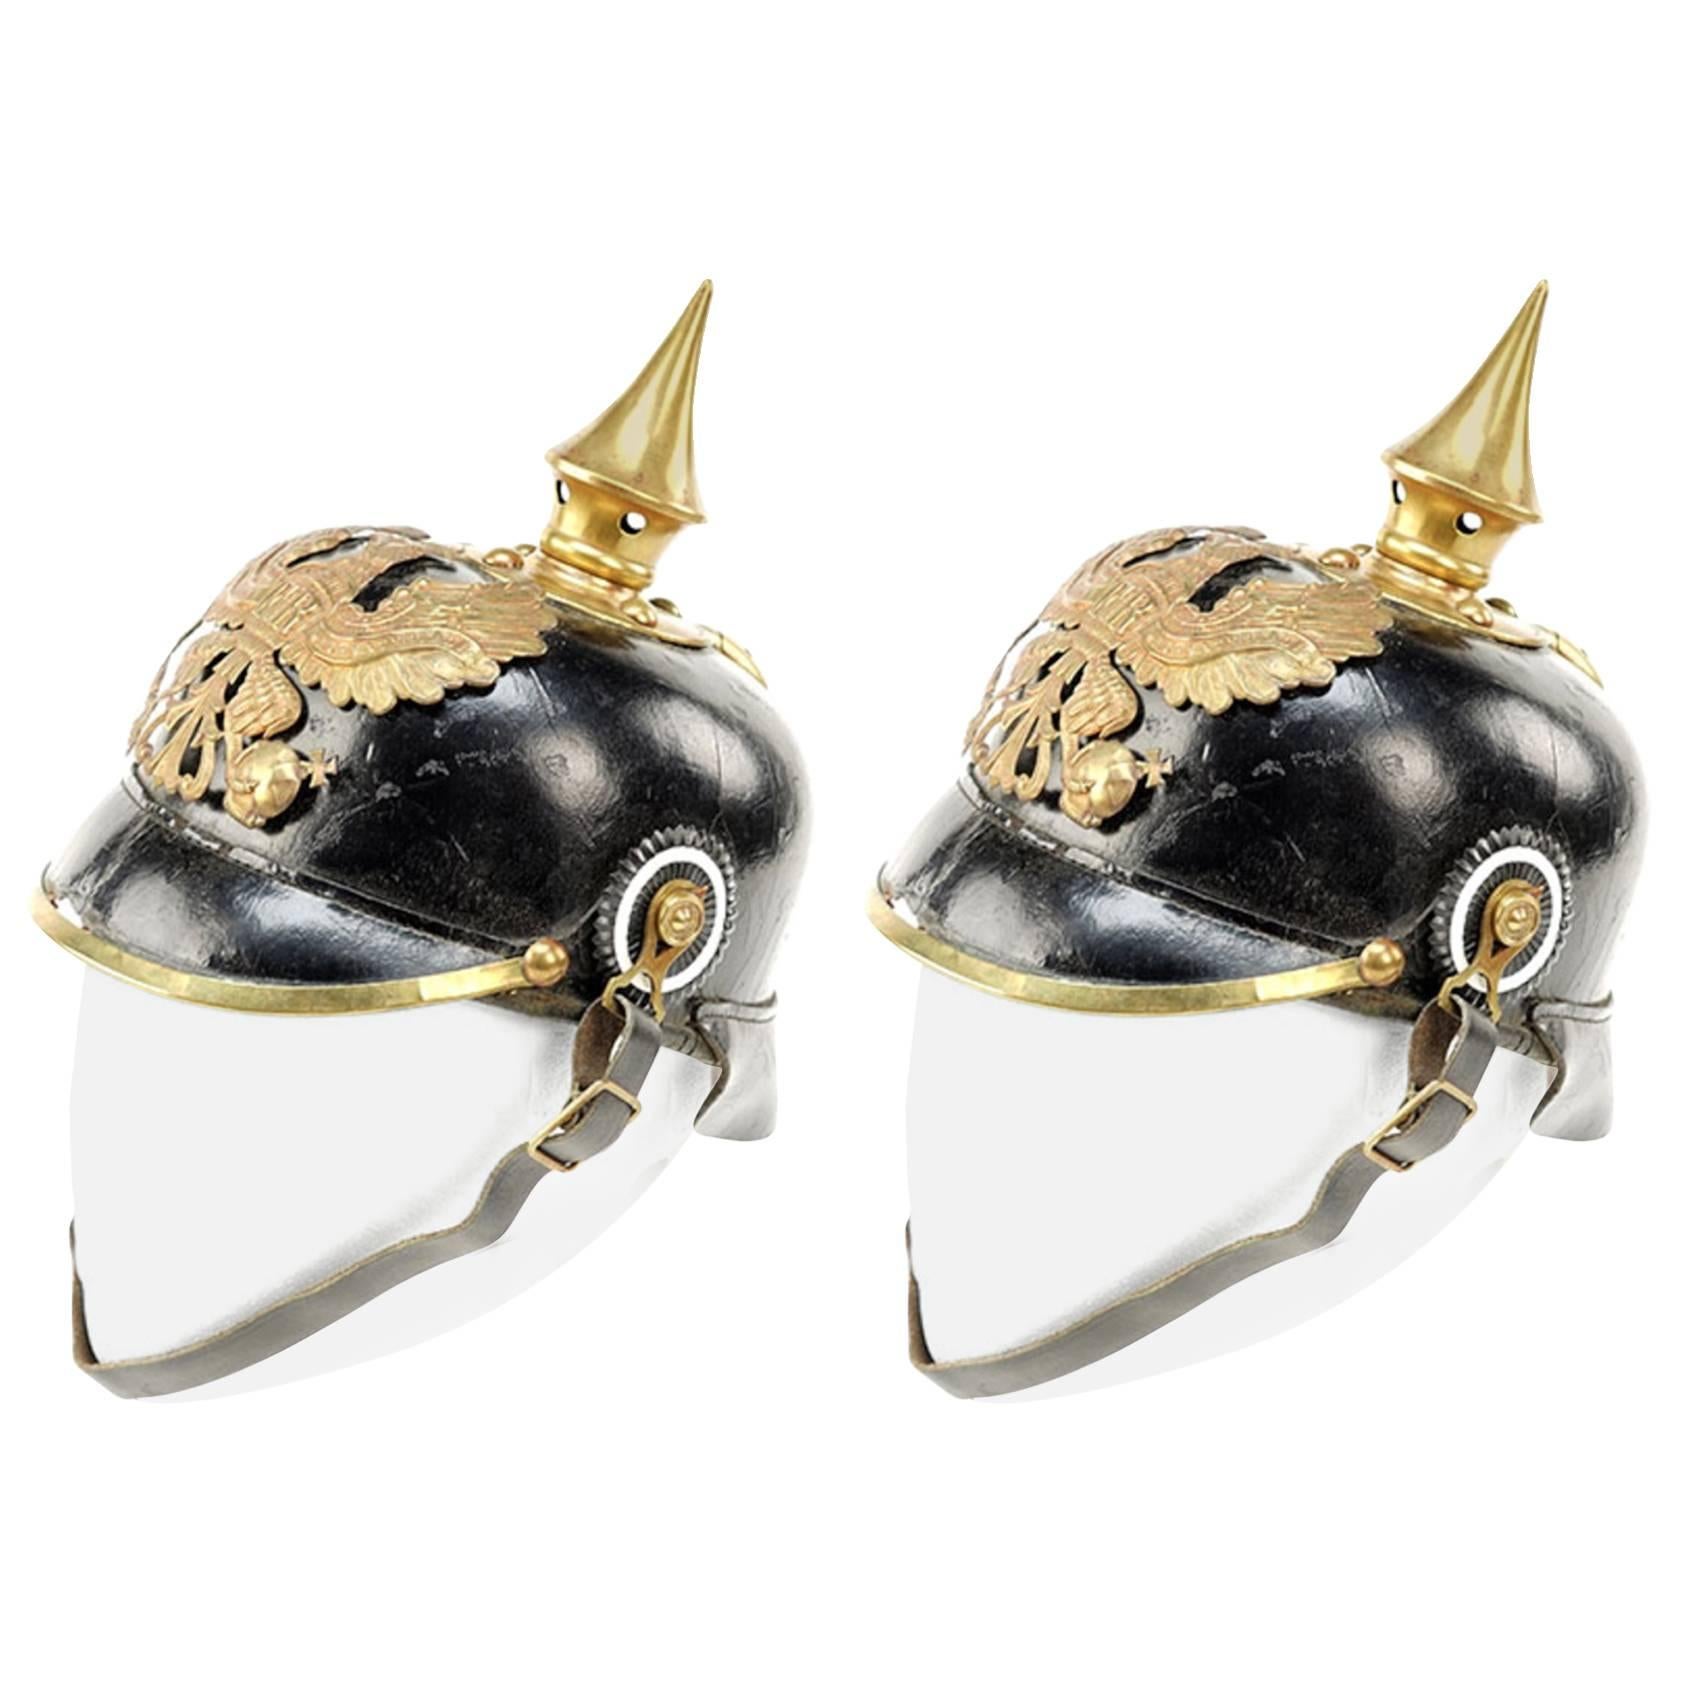 Two 19th Century Austrian Parade Pickle Helmets